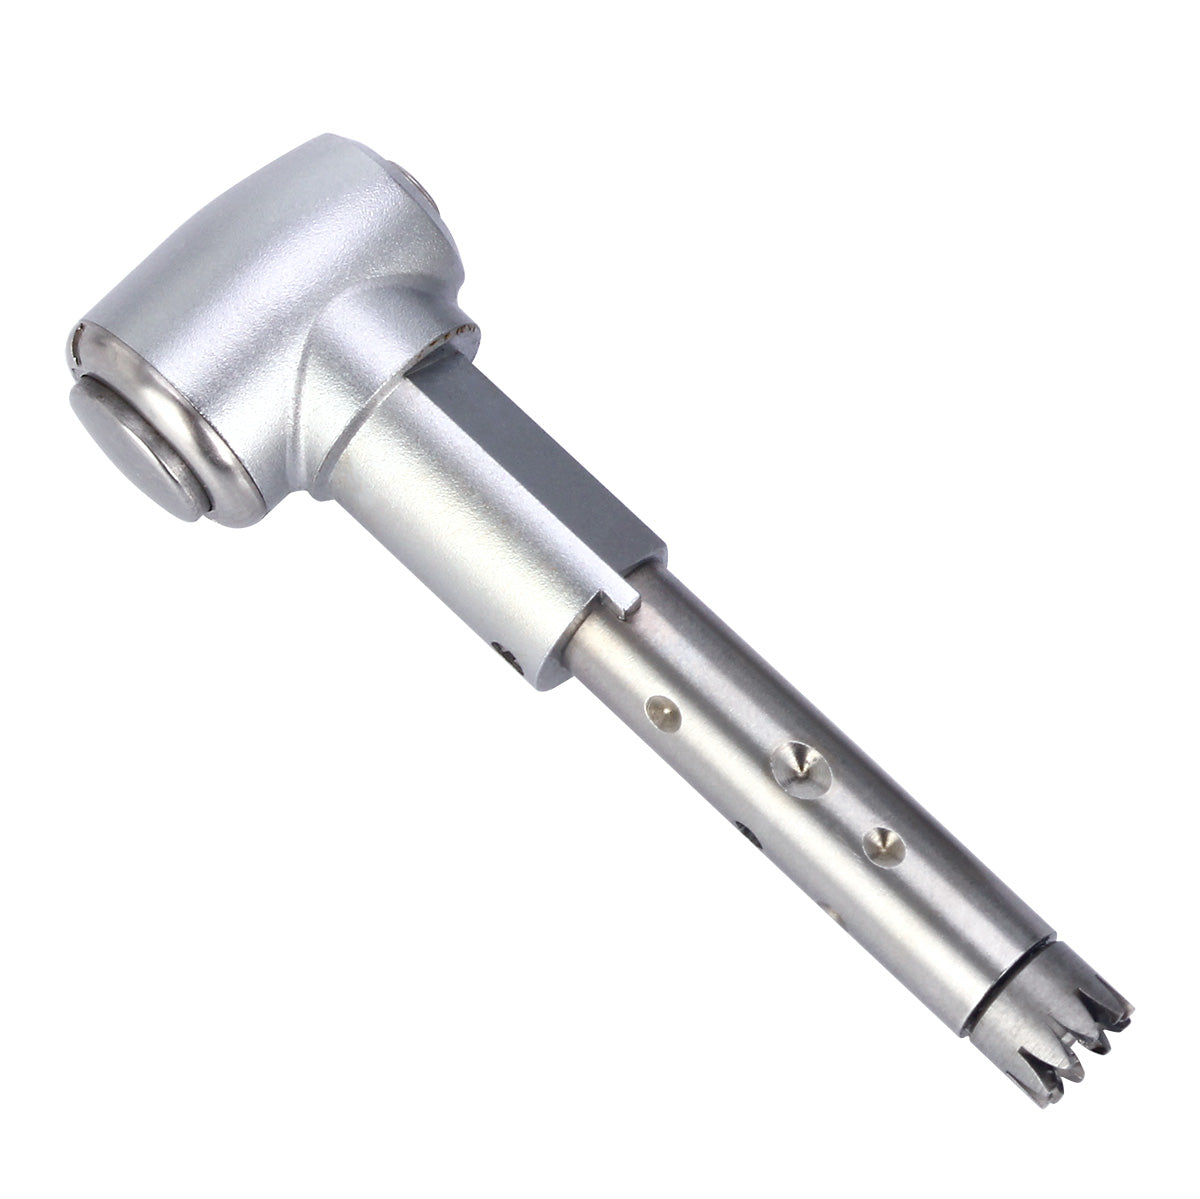 Dental Intra Head 1:1 Push Button Contra Angle Handpiece Low Speed - pairaydental.com